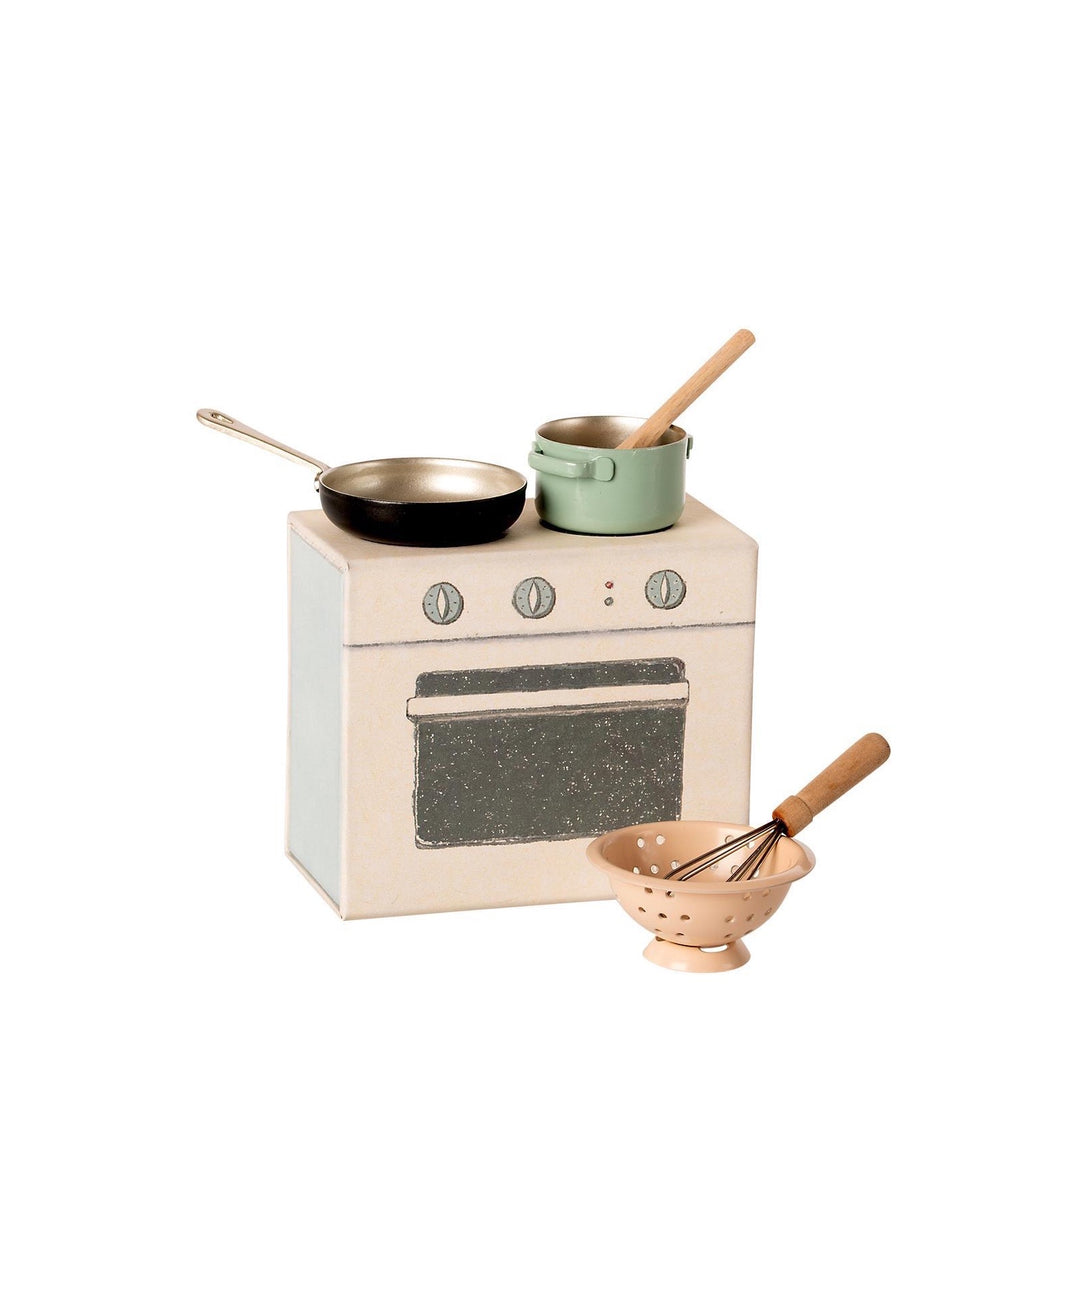 Miniature Maileg Cooking Set - Charming Dollhouse Accessories